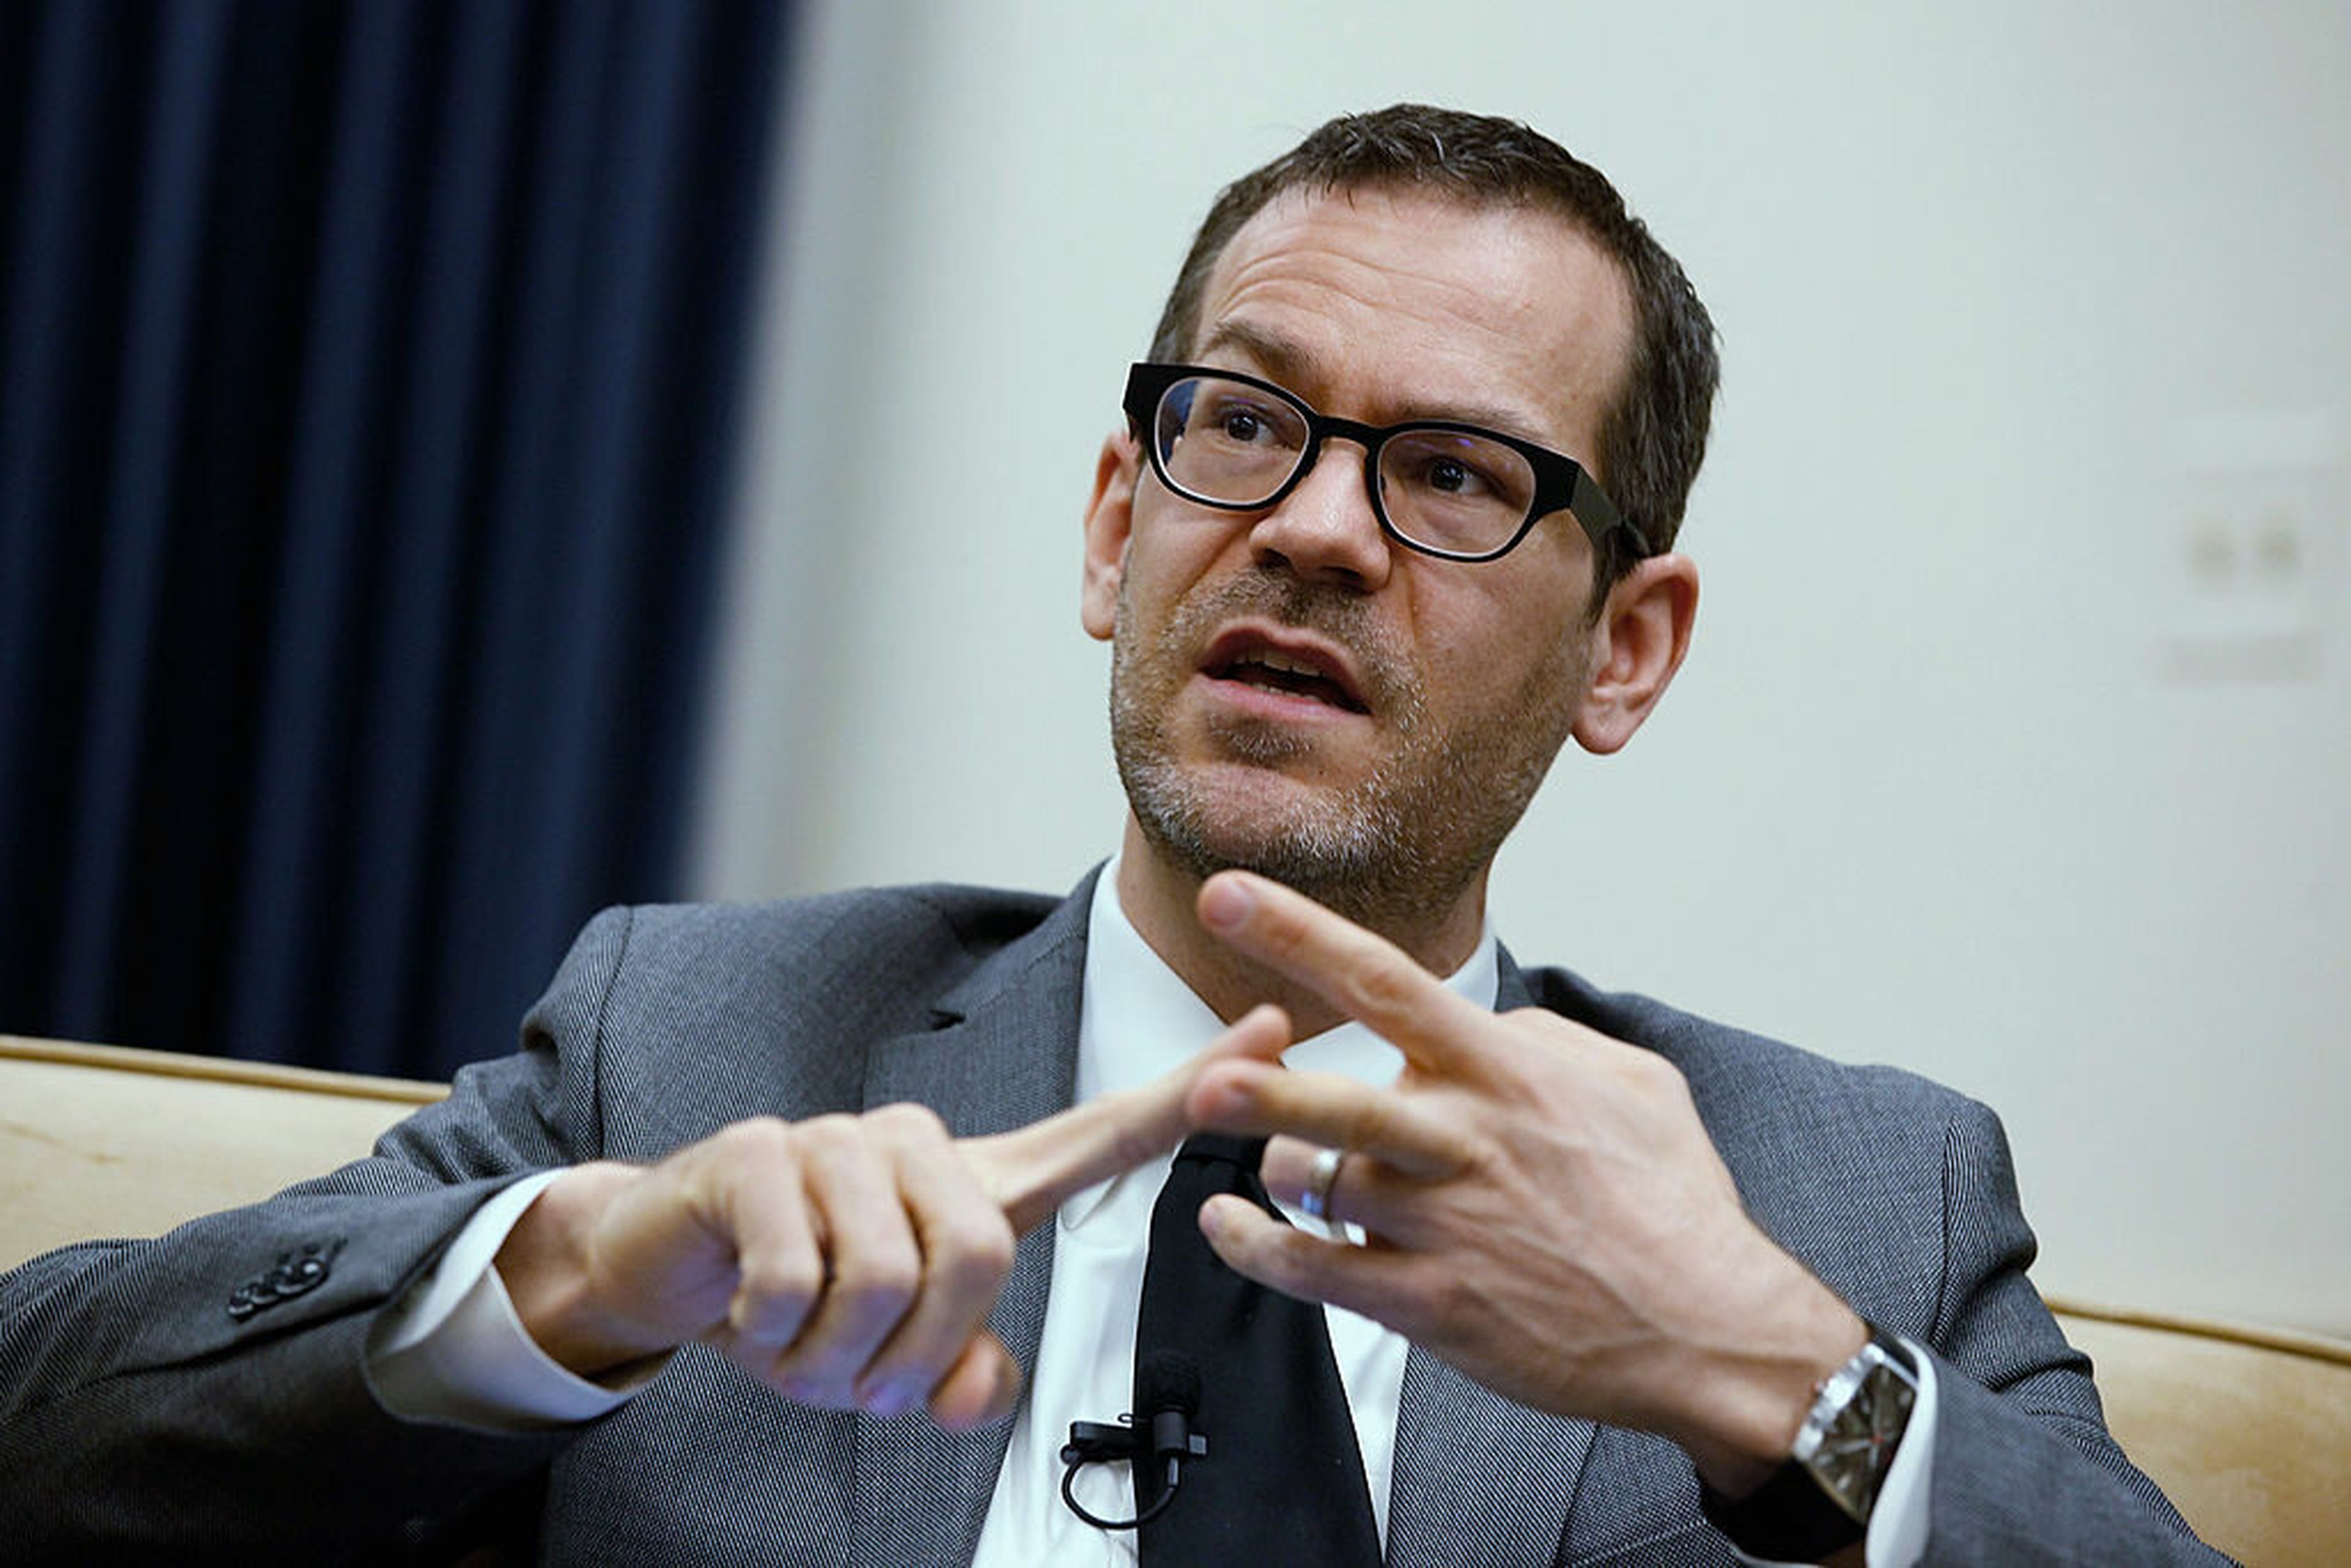 Current Undersecretary of Defense for Policy Colin Kahl participates in a 2012 panel discussion about Iran&#8217;s nuclear program. Congress is pressing for more clarity around the roles and responsibilities of different cyber officials.(Photo by Chip Somodevilla/Getty Images)